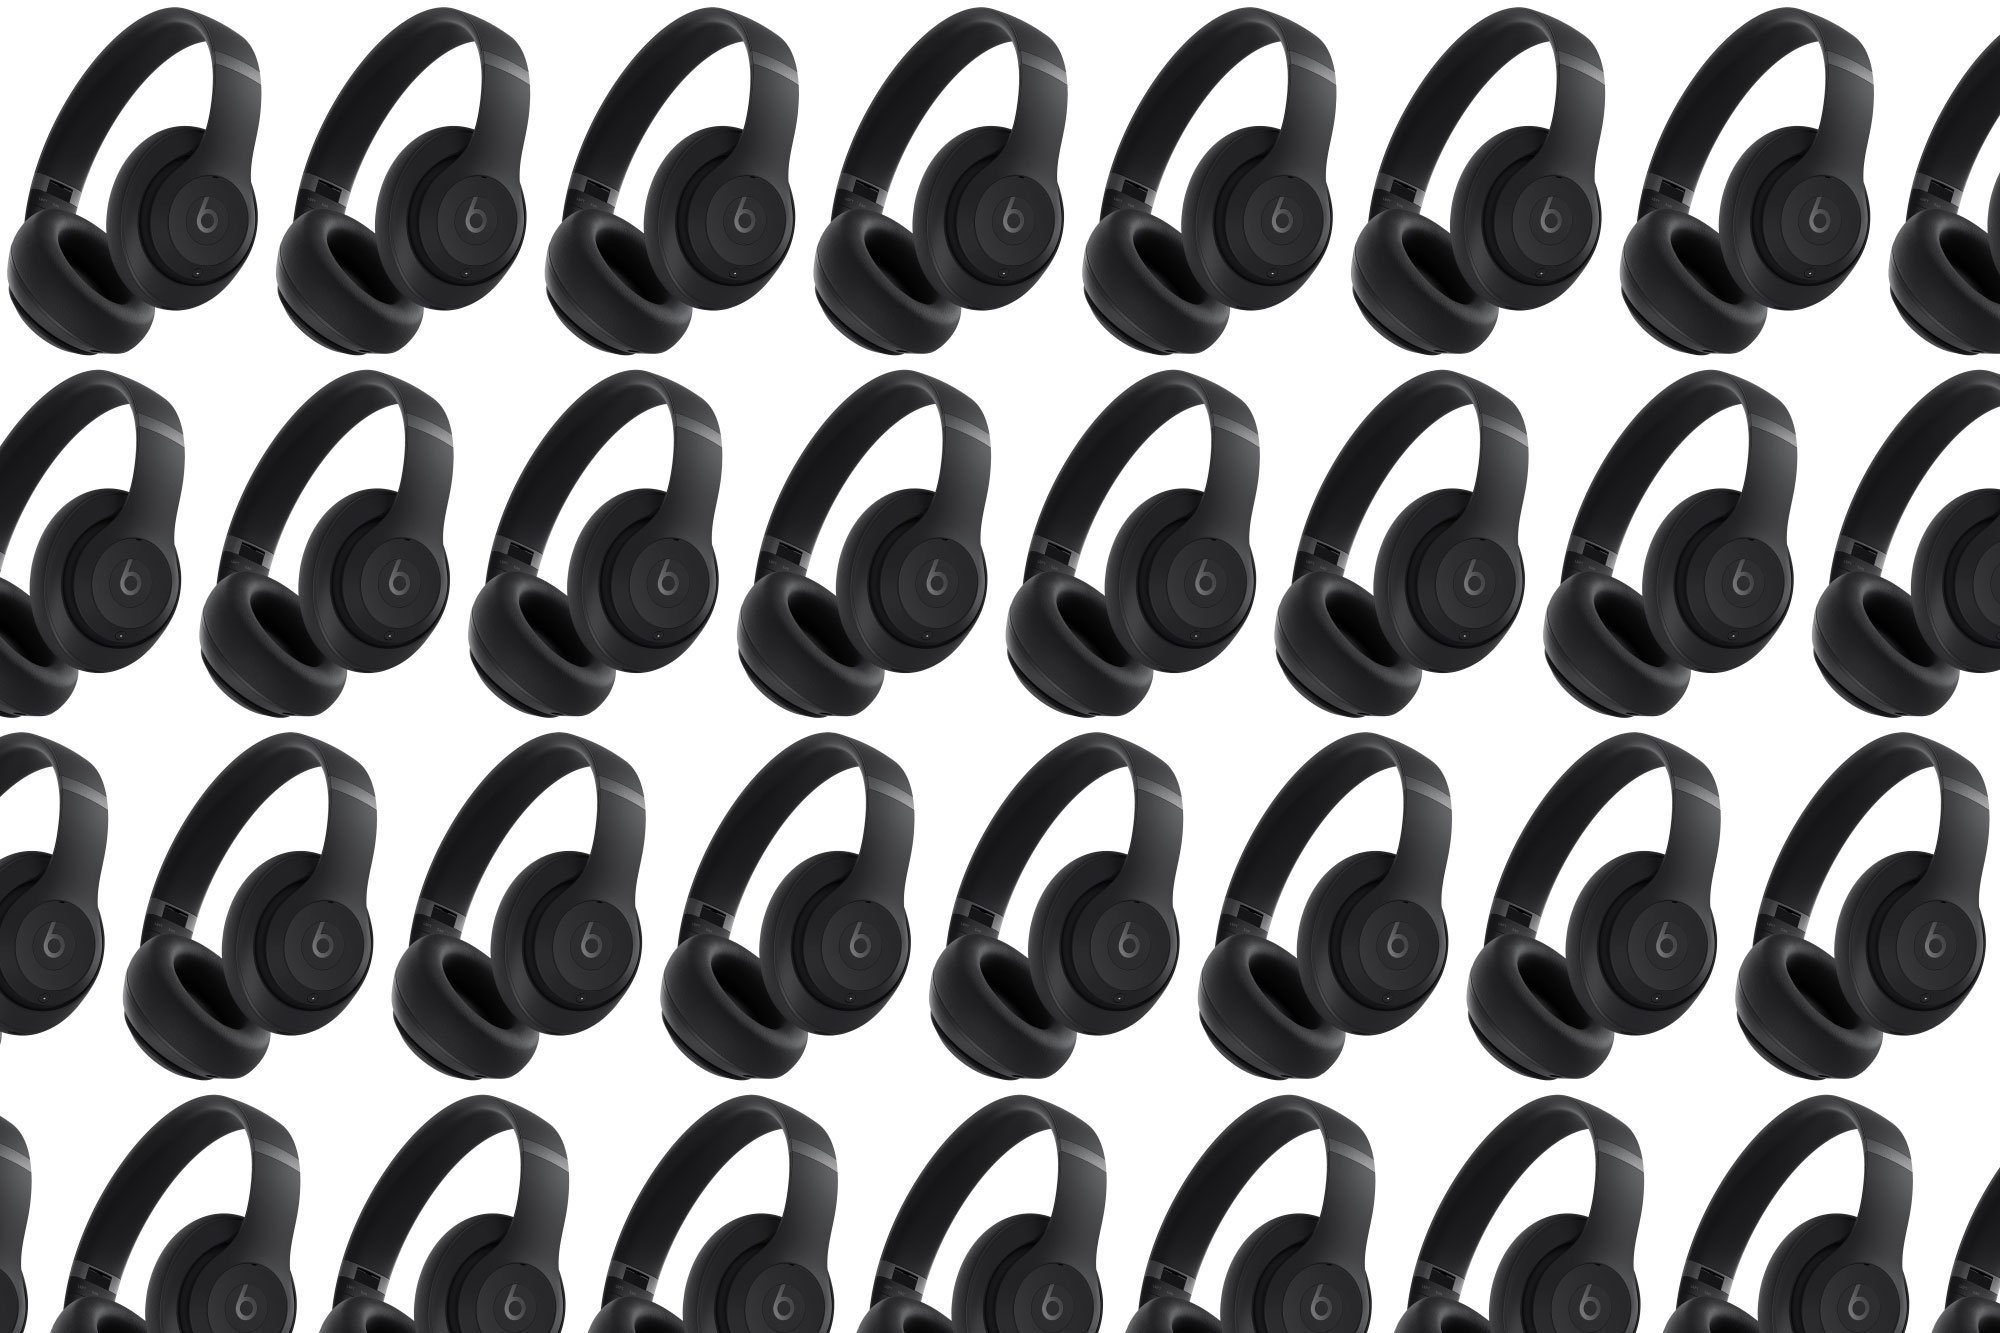 Shop headphones from Beats, Sony, and more during Amazon Black Friday and save up to 51%